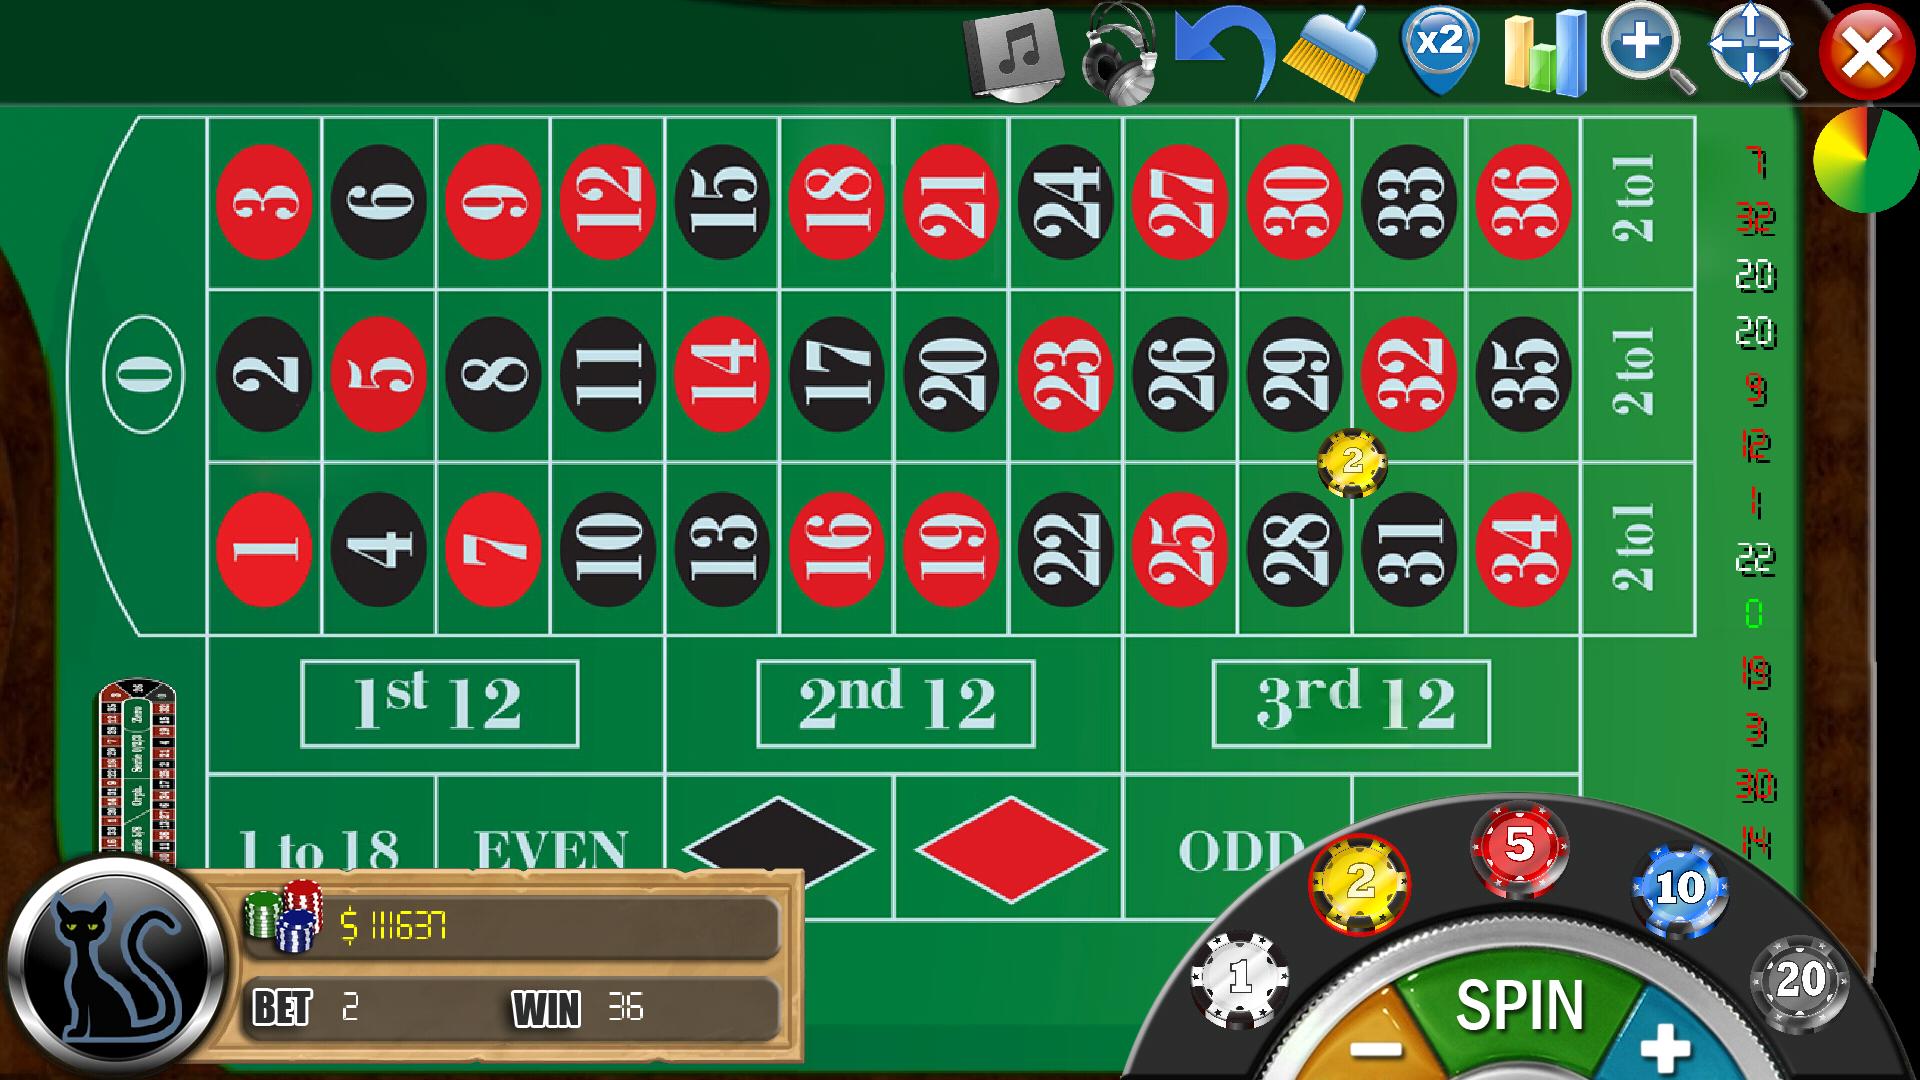 Roulette Deluxe FREE for Android - APK Download